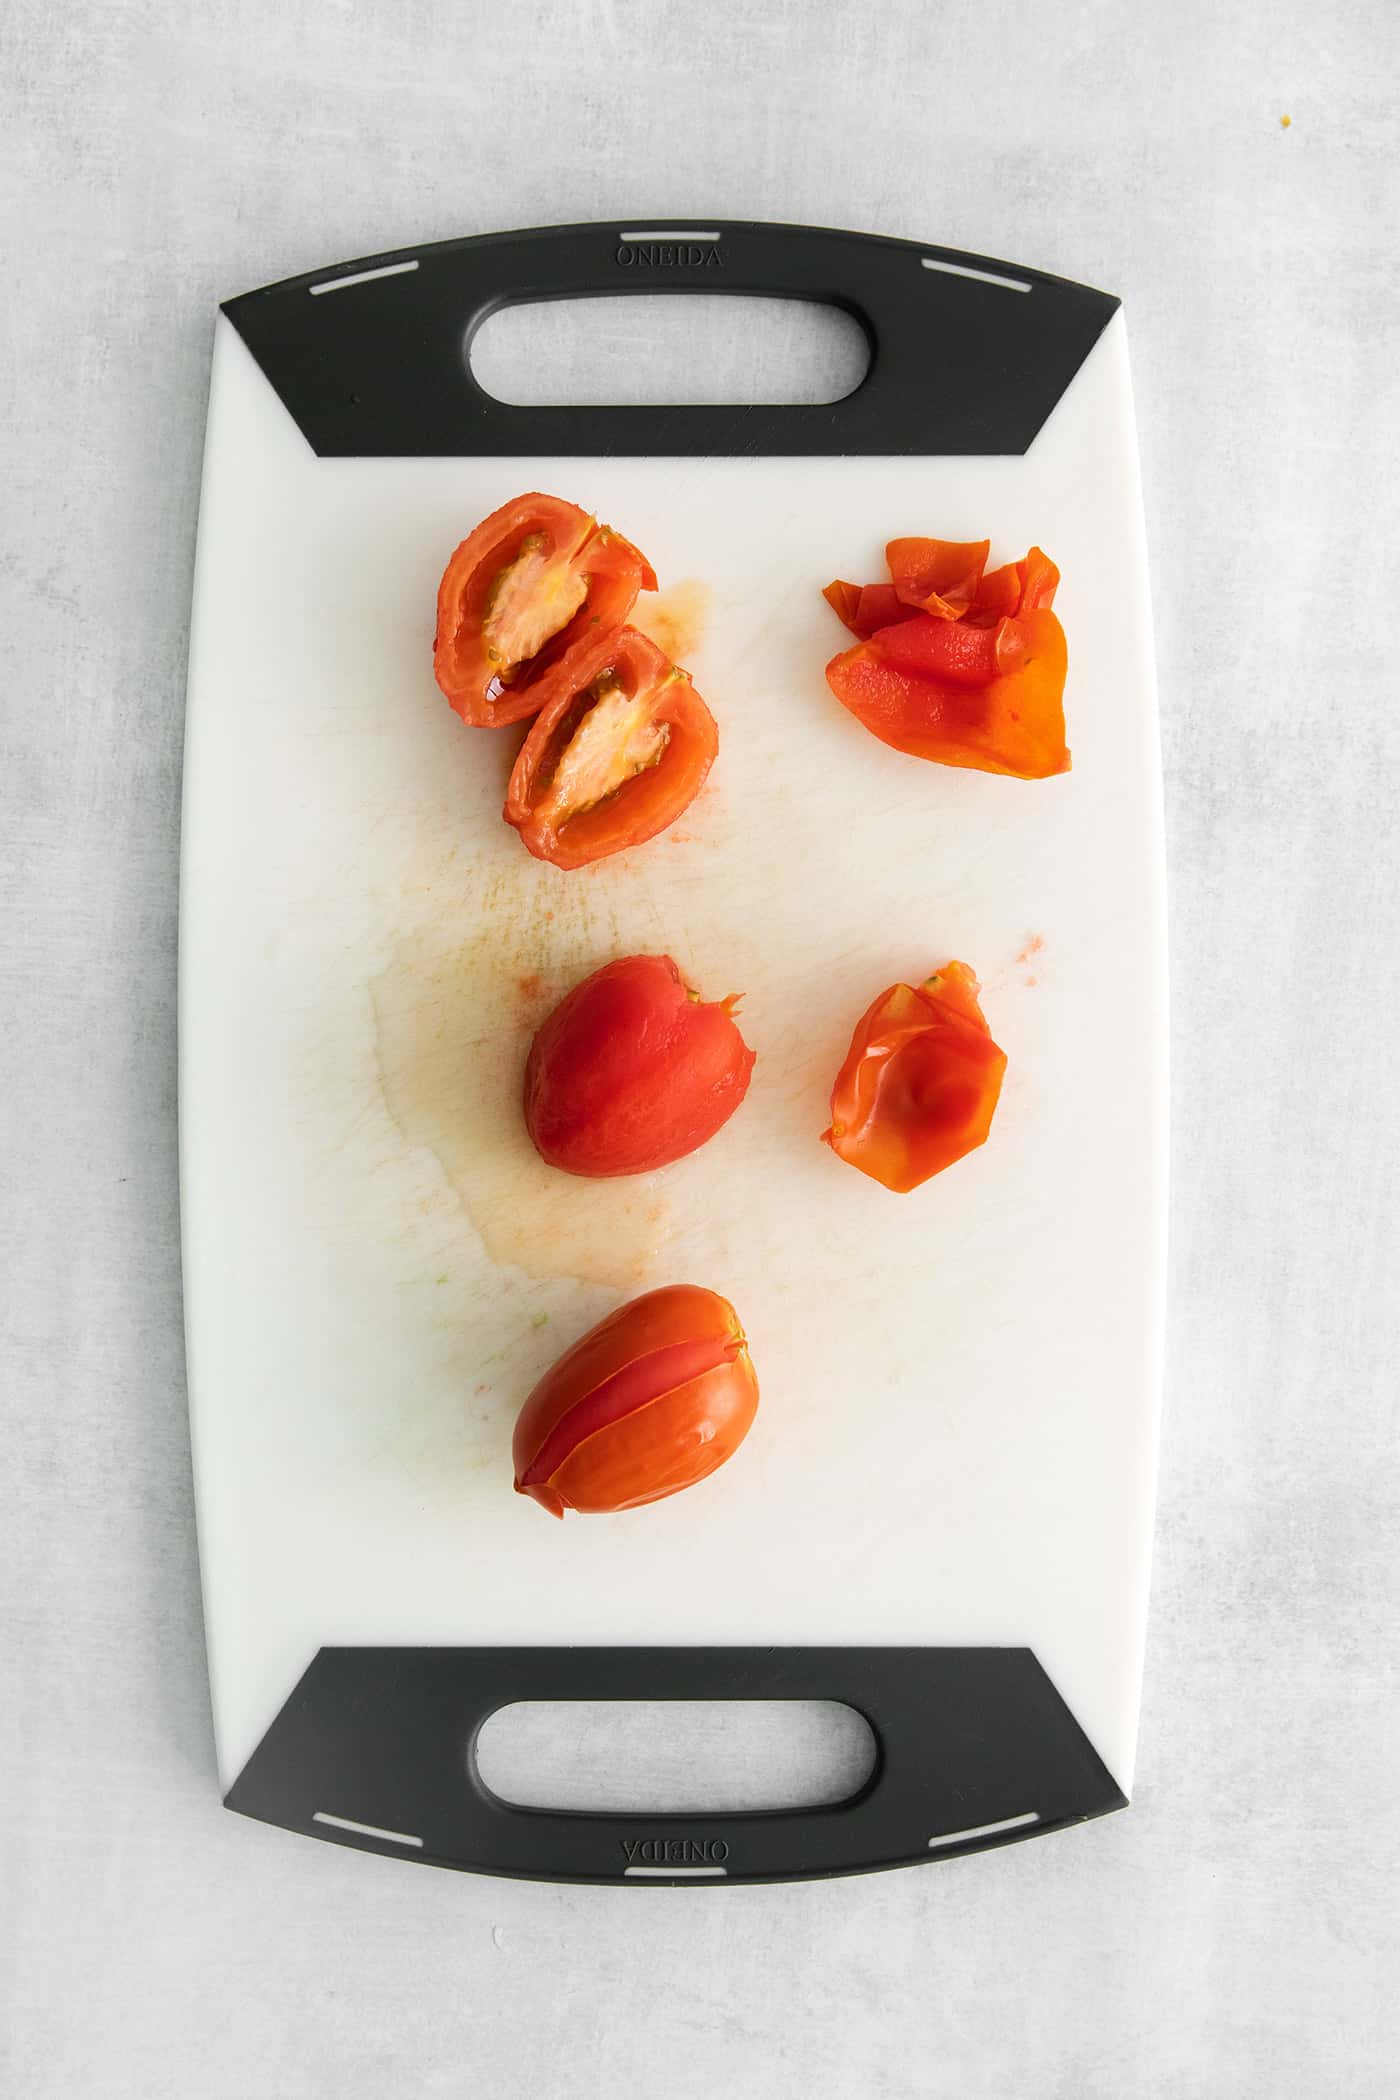 Skinned tomatoes and tomatoes cut in half on a cutting board